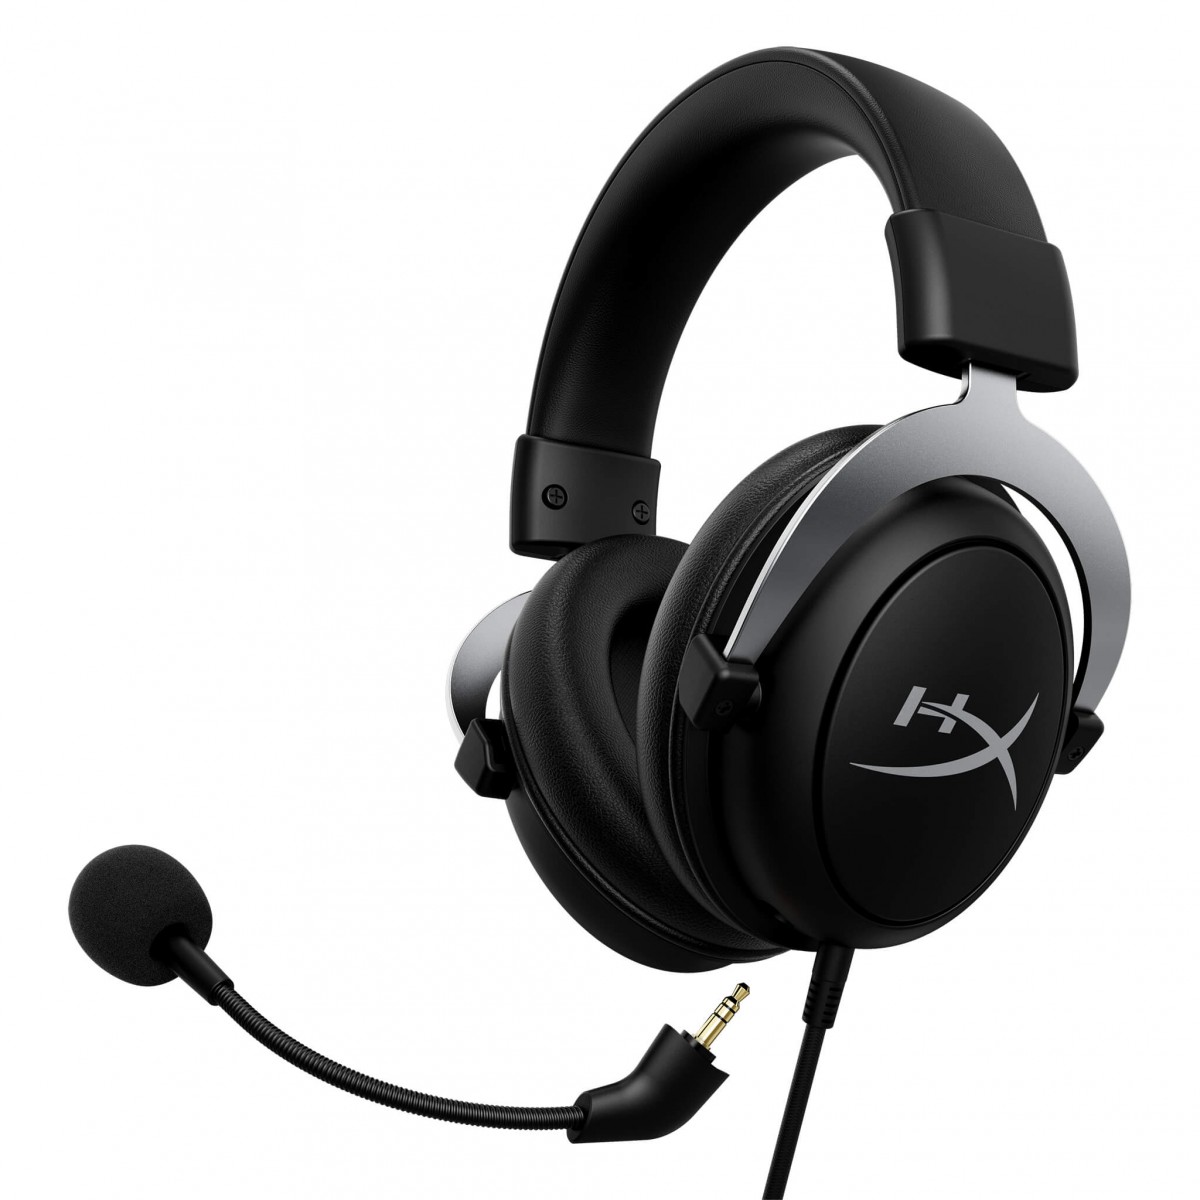 hyper x headset for xbox one